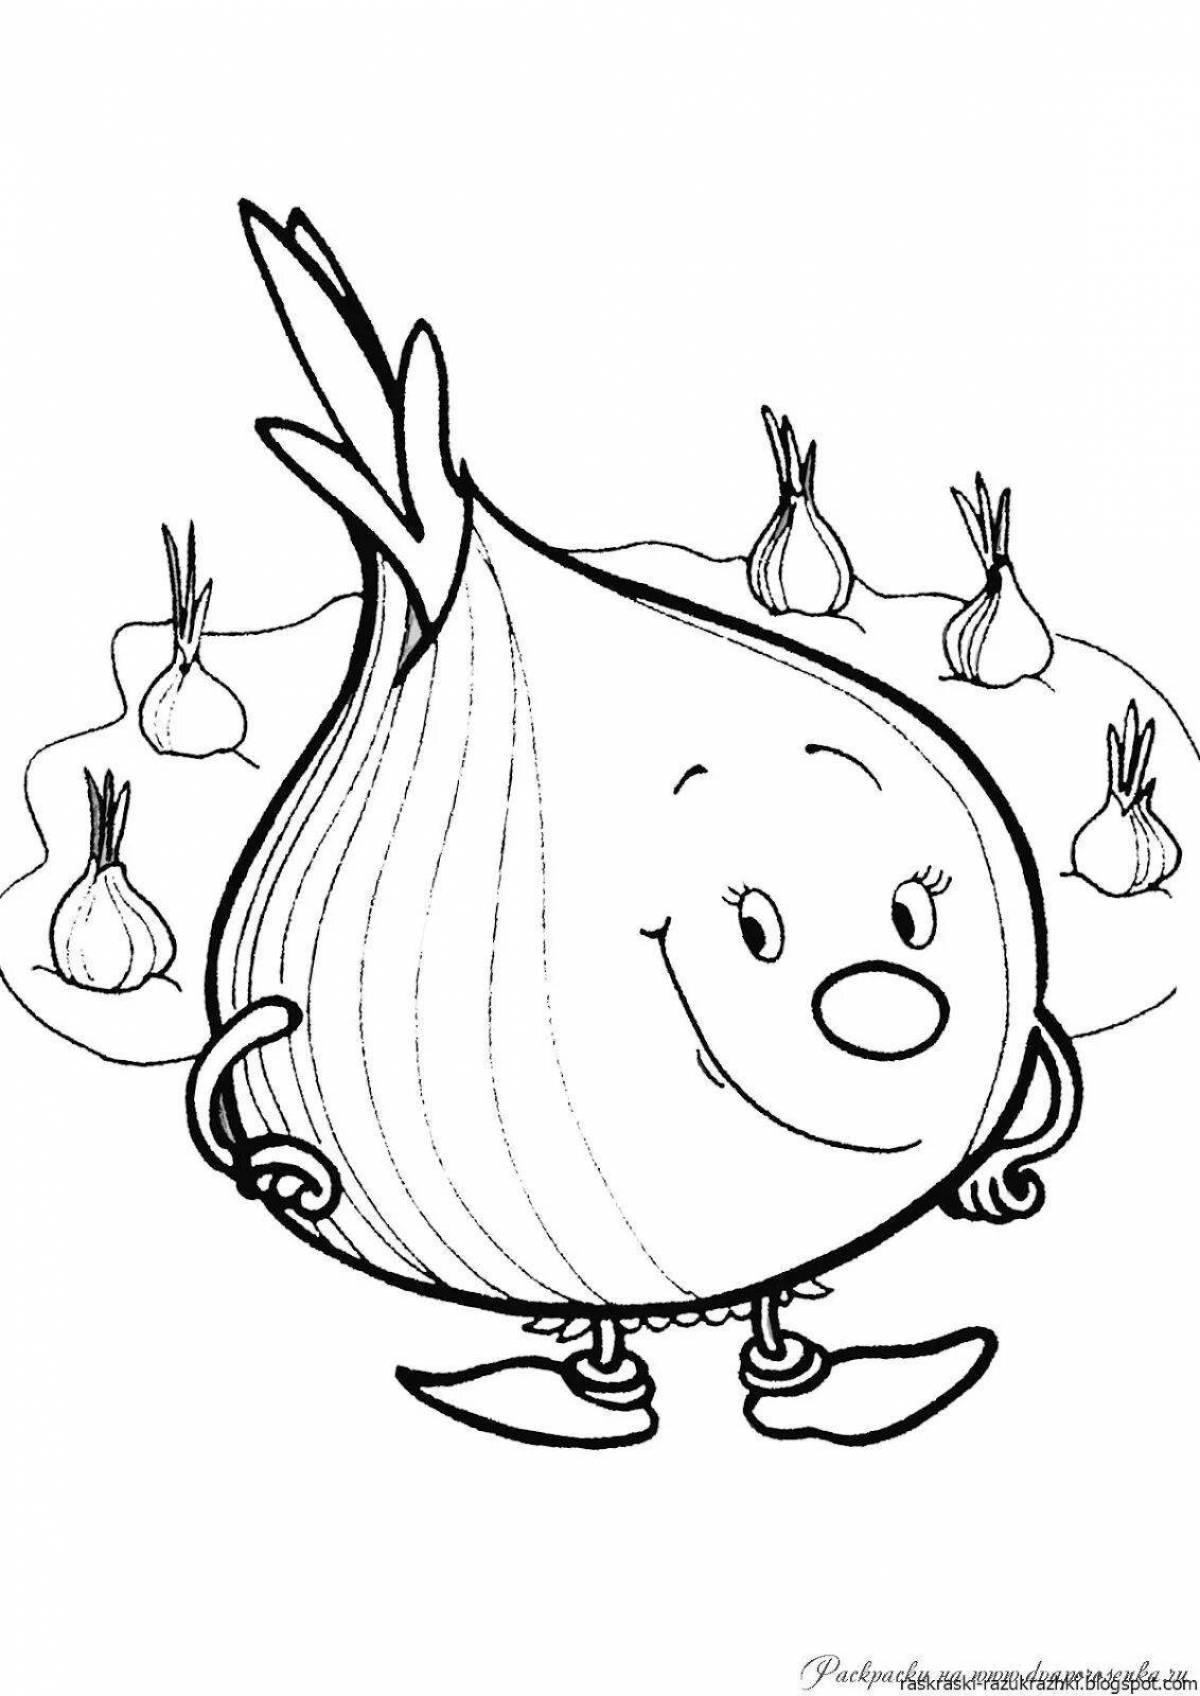 Adorable vegetable coloring book for toddlers